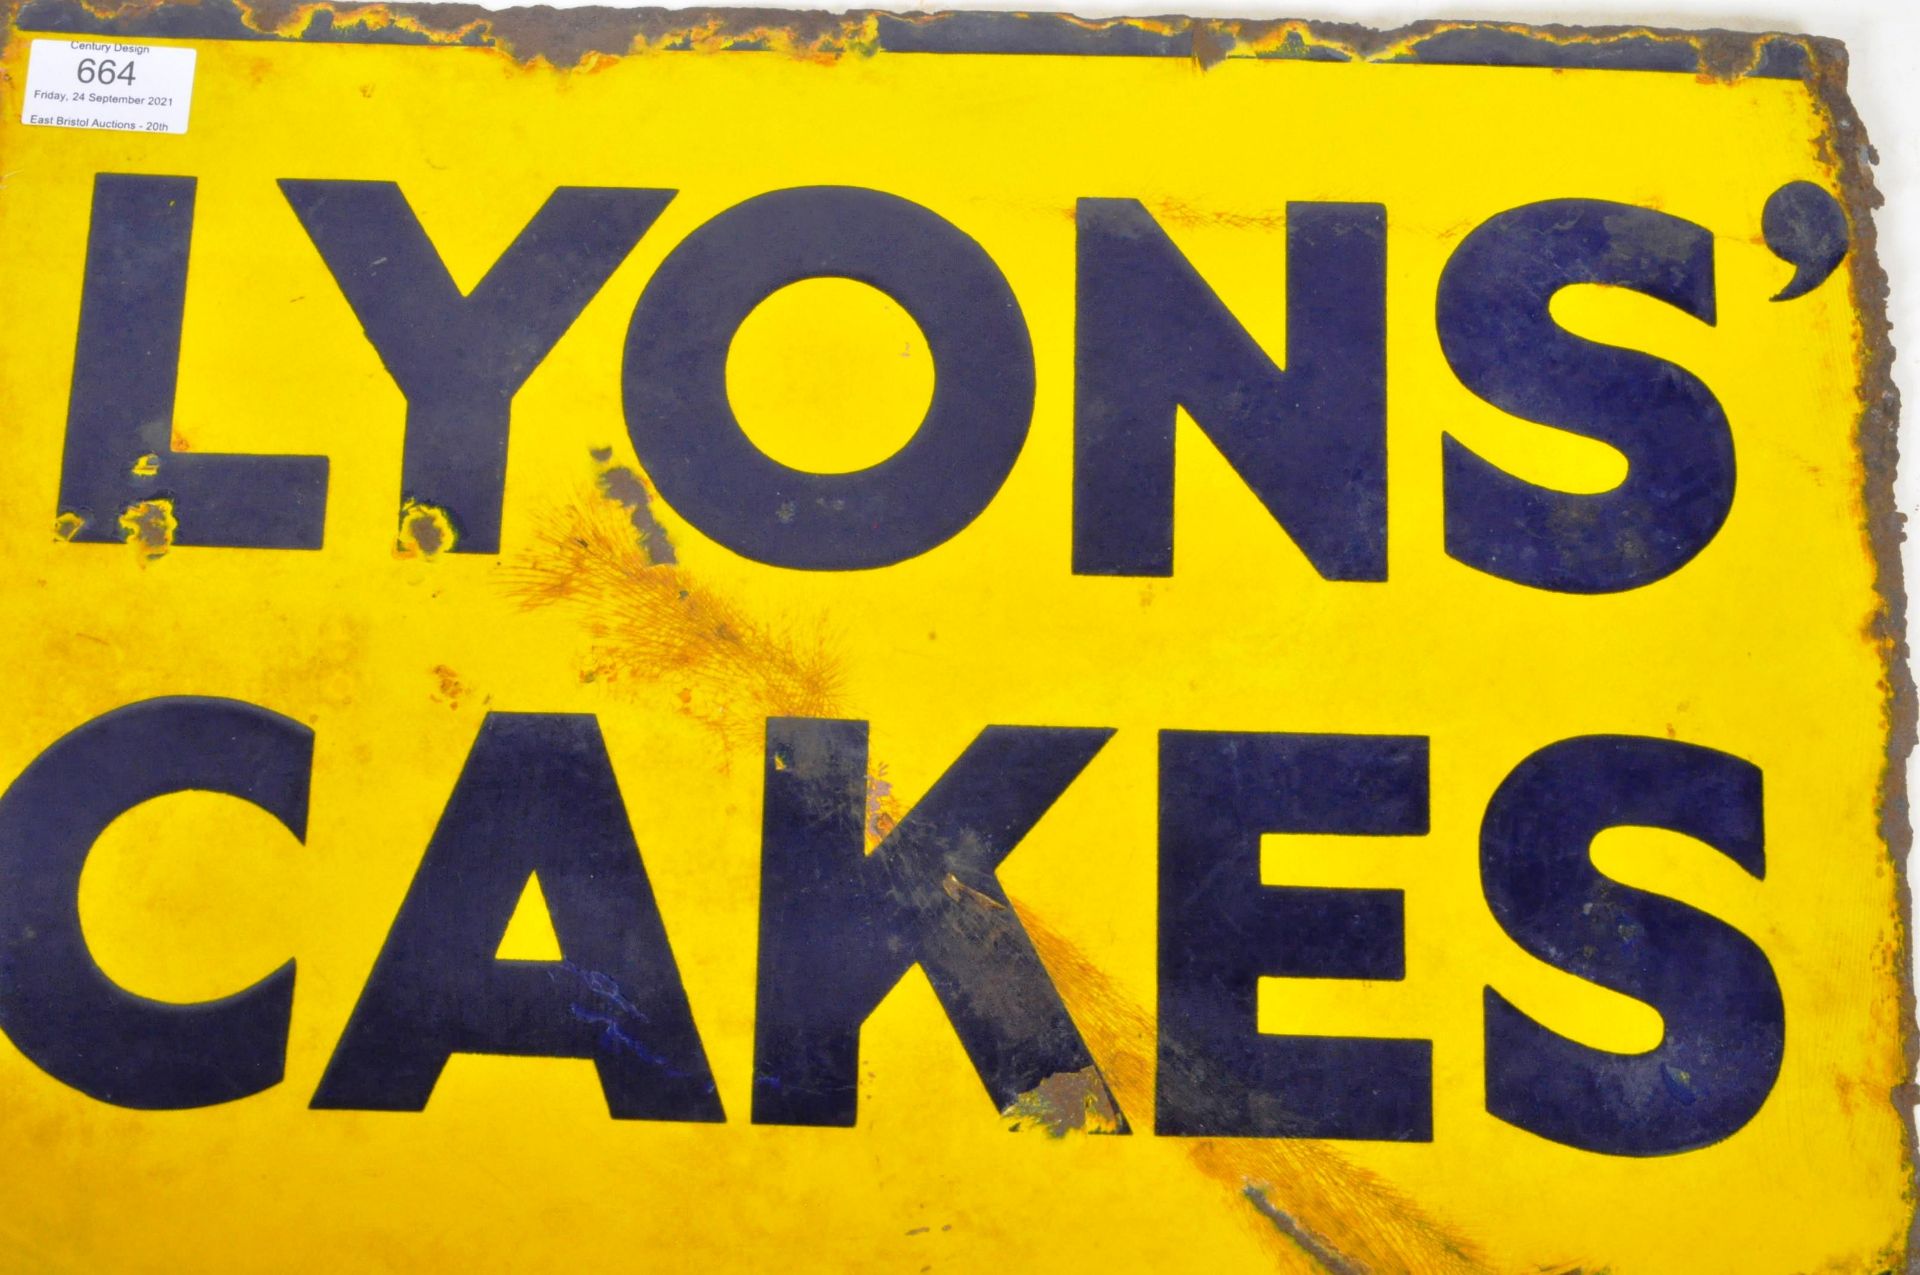 LYONS CAKES - MID 20TH CENTURY DOUBLE SIDED ENAMEL SIGN - Image 3 of 4